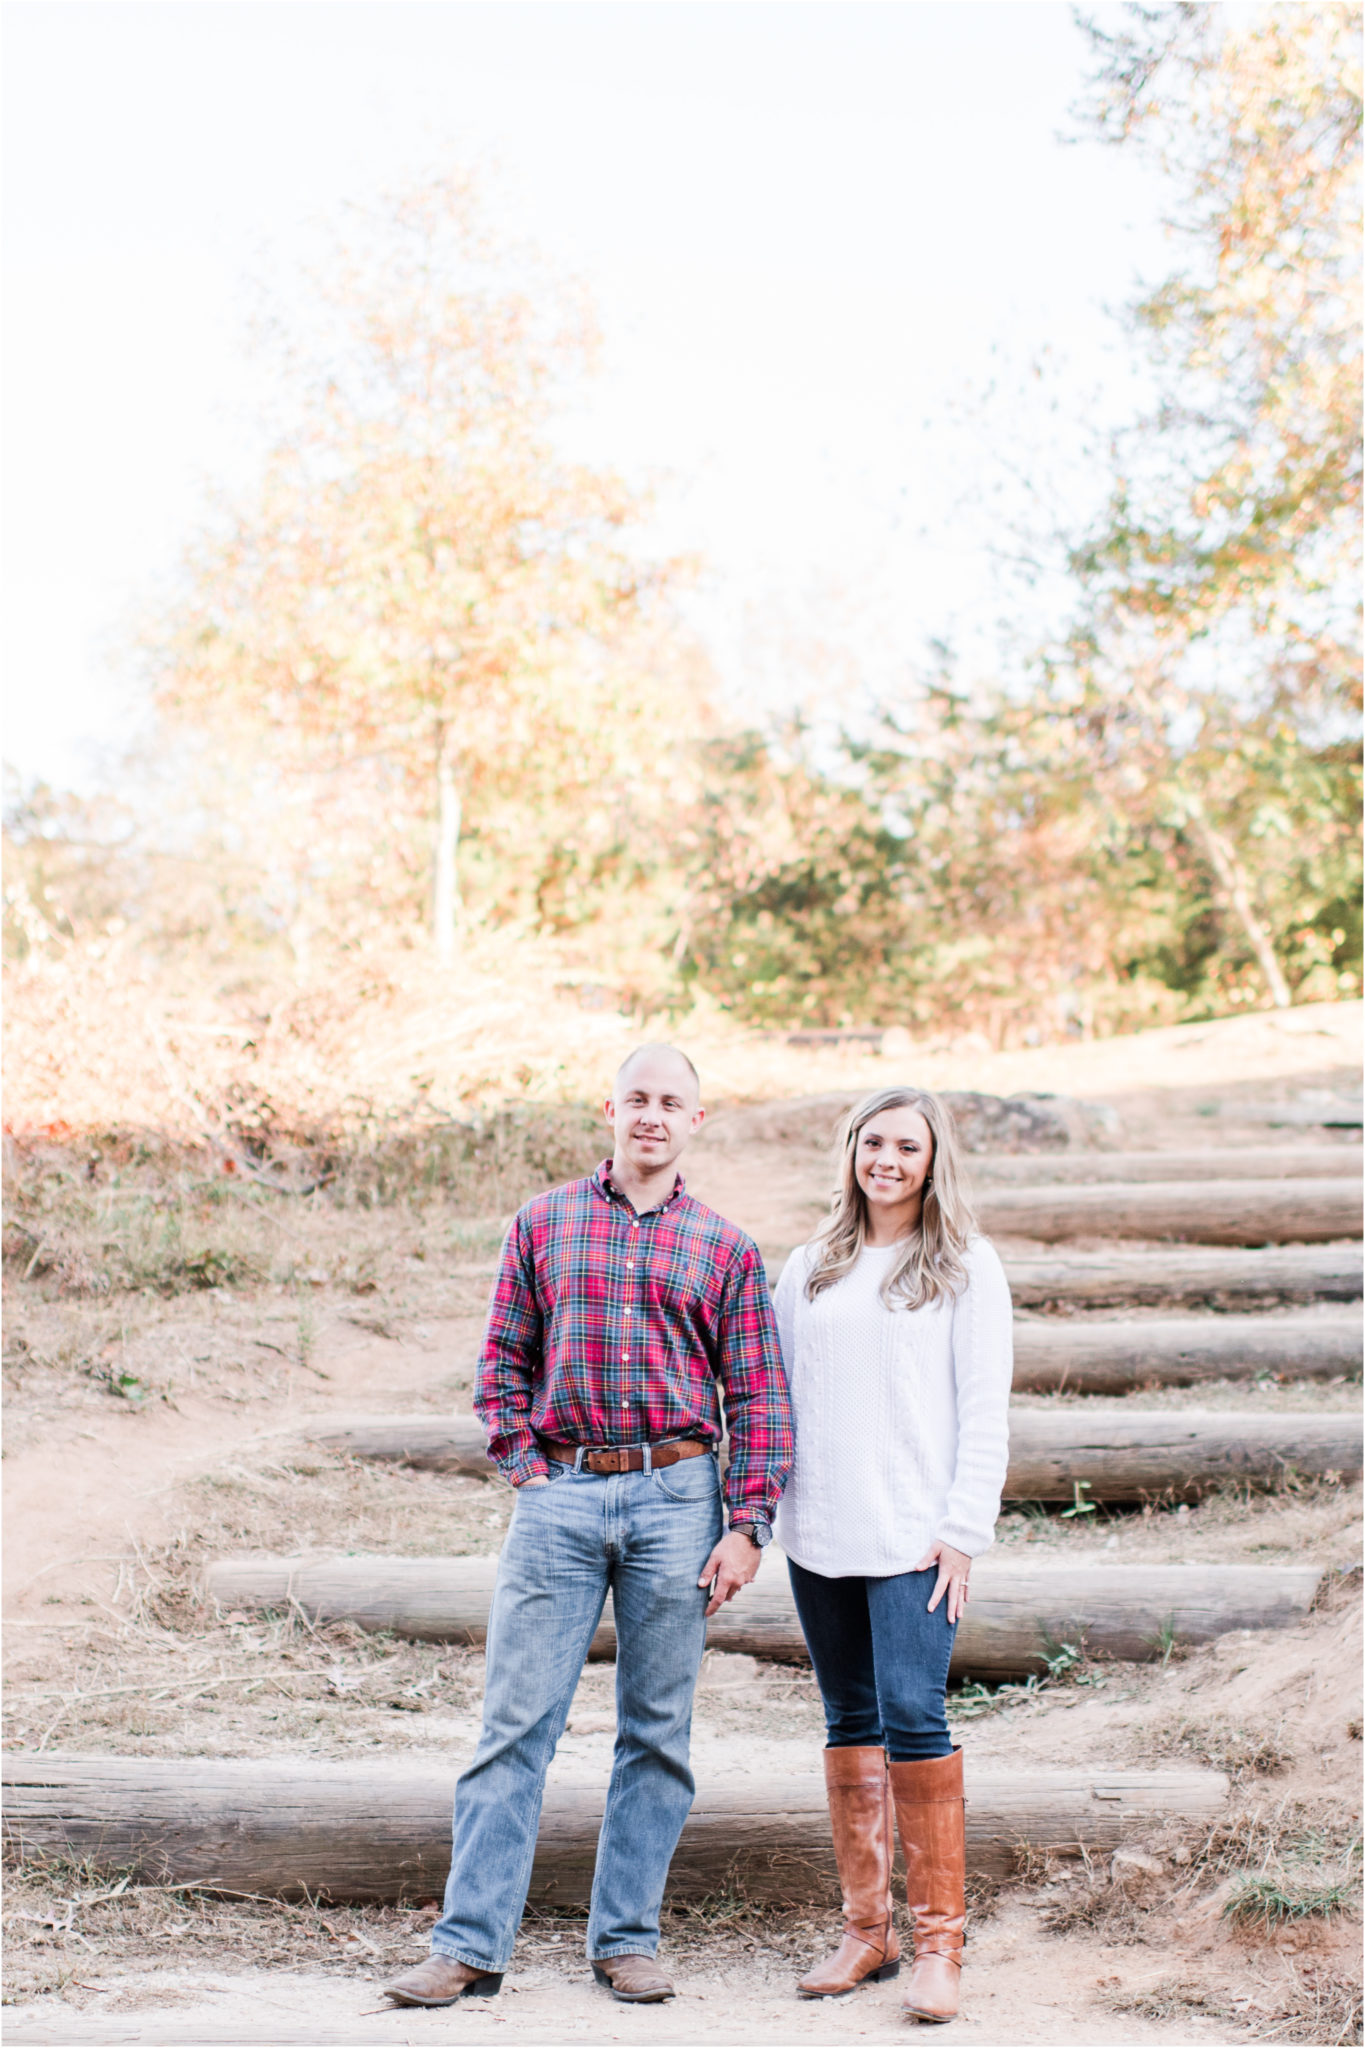 Fall Paris Mountain Engagement Session in Greenville, South Carolina